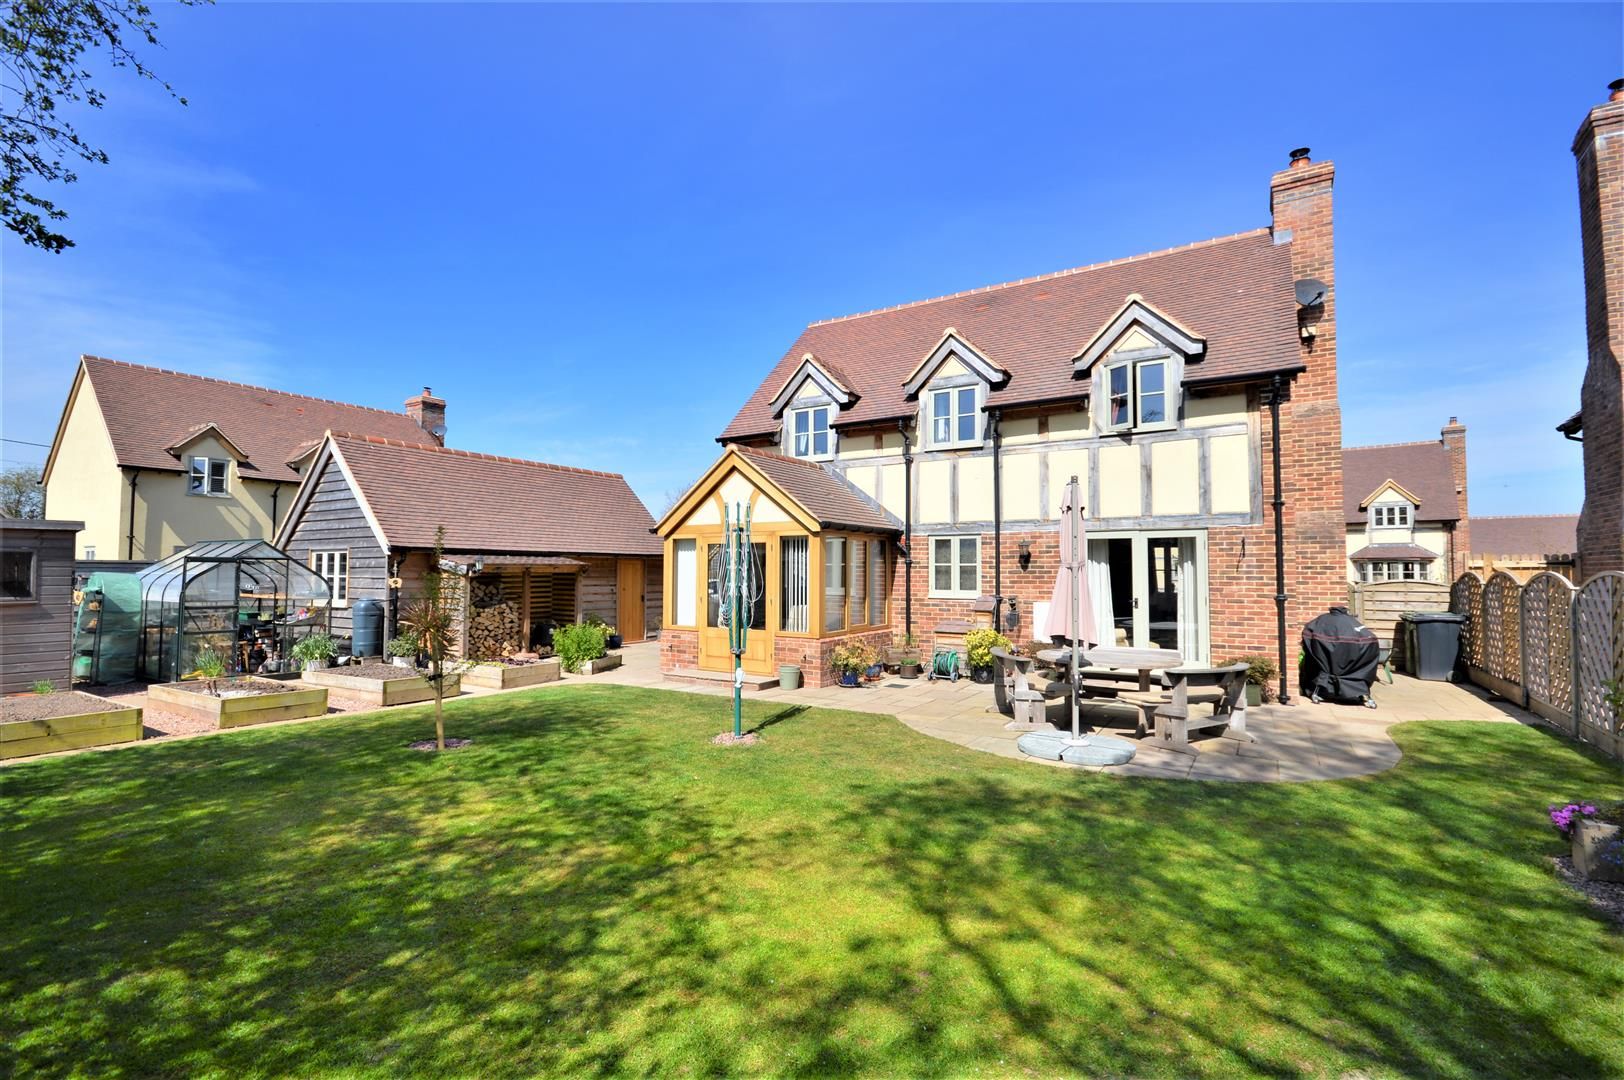 3 bed detached for sale in Winforton - Property Image 1